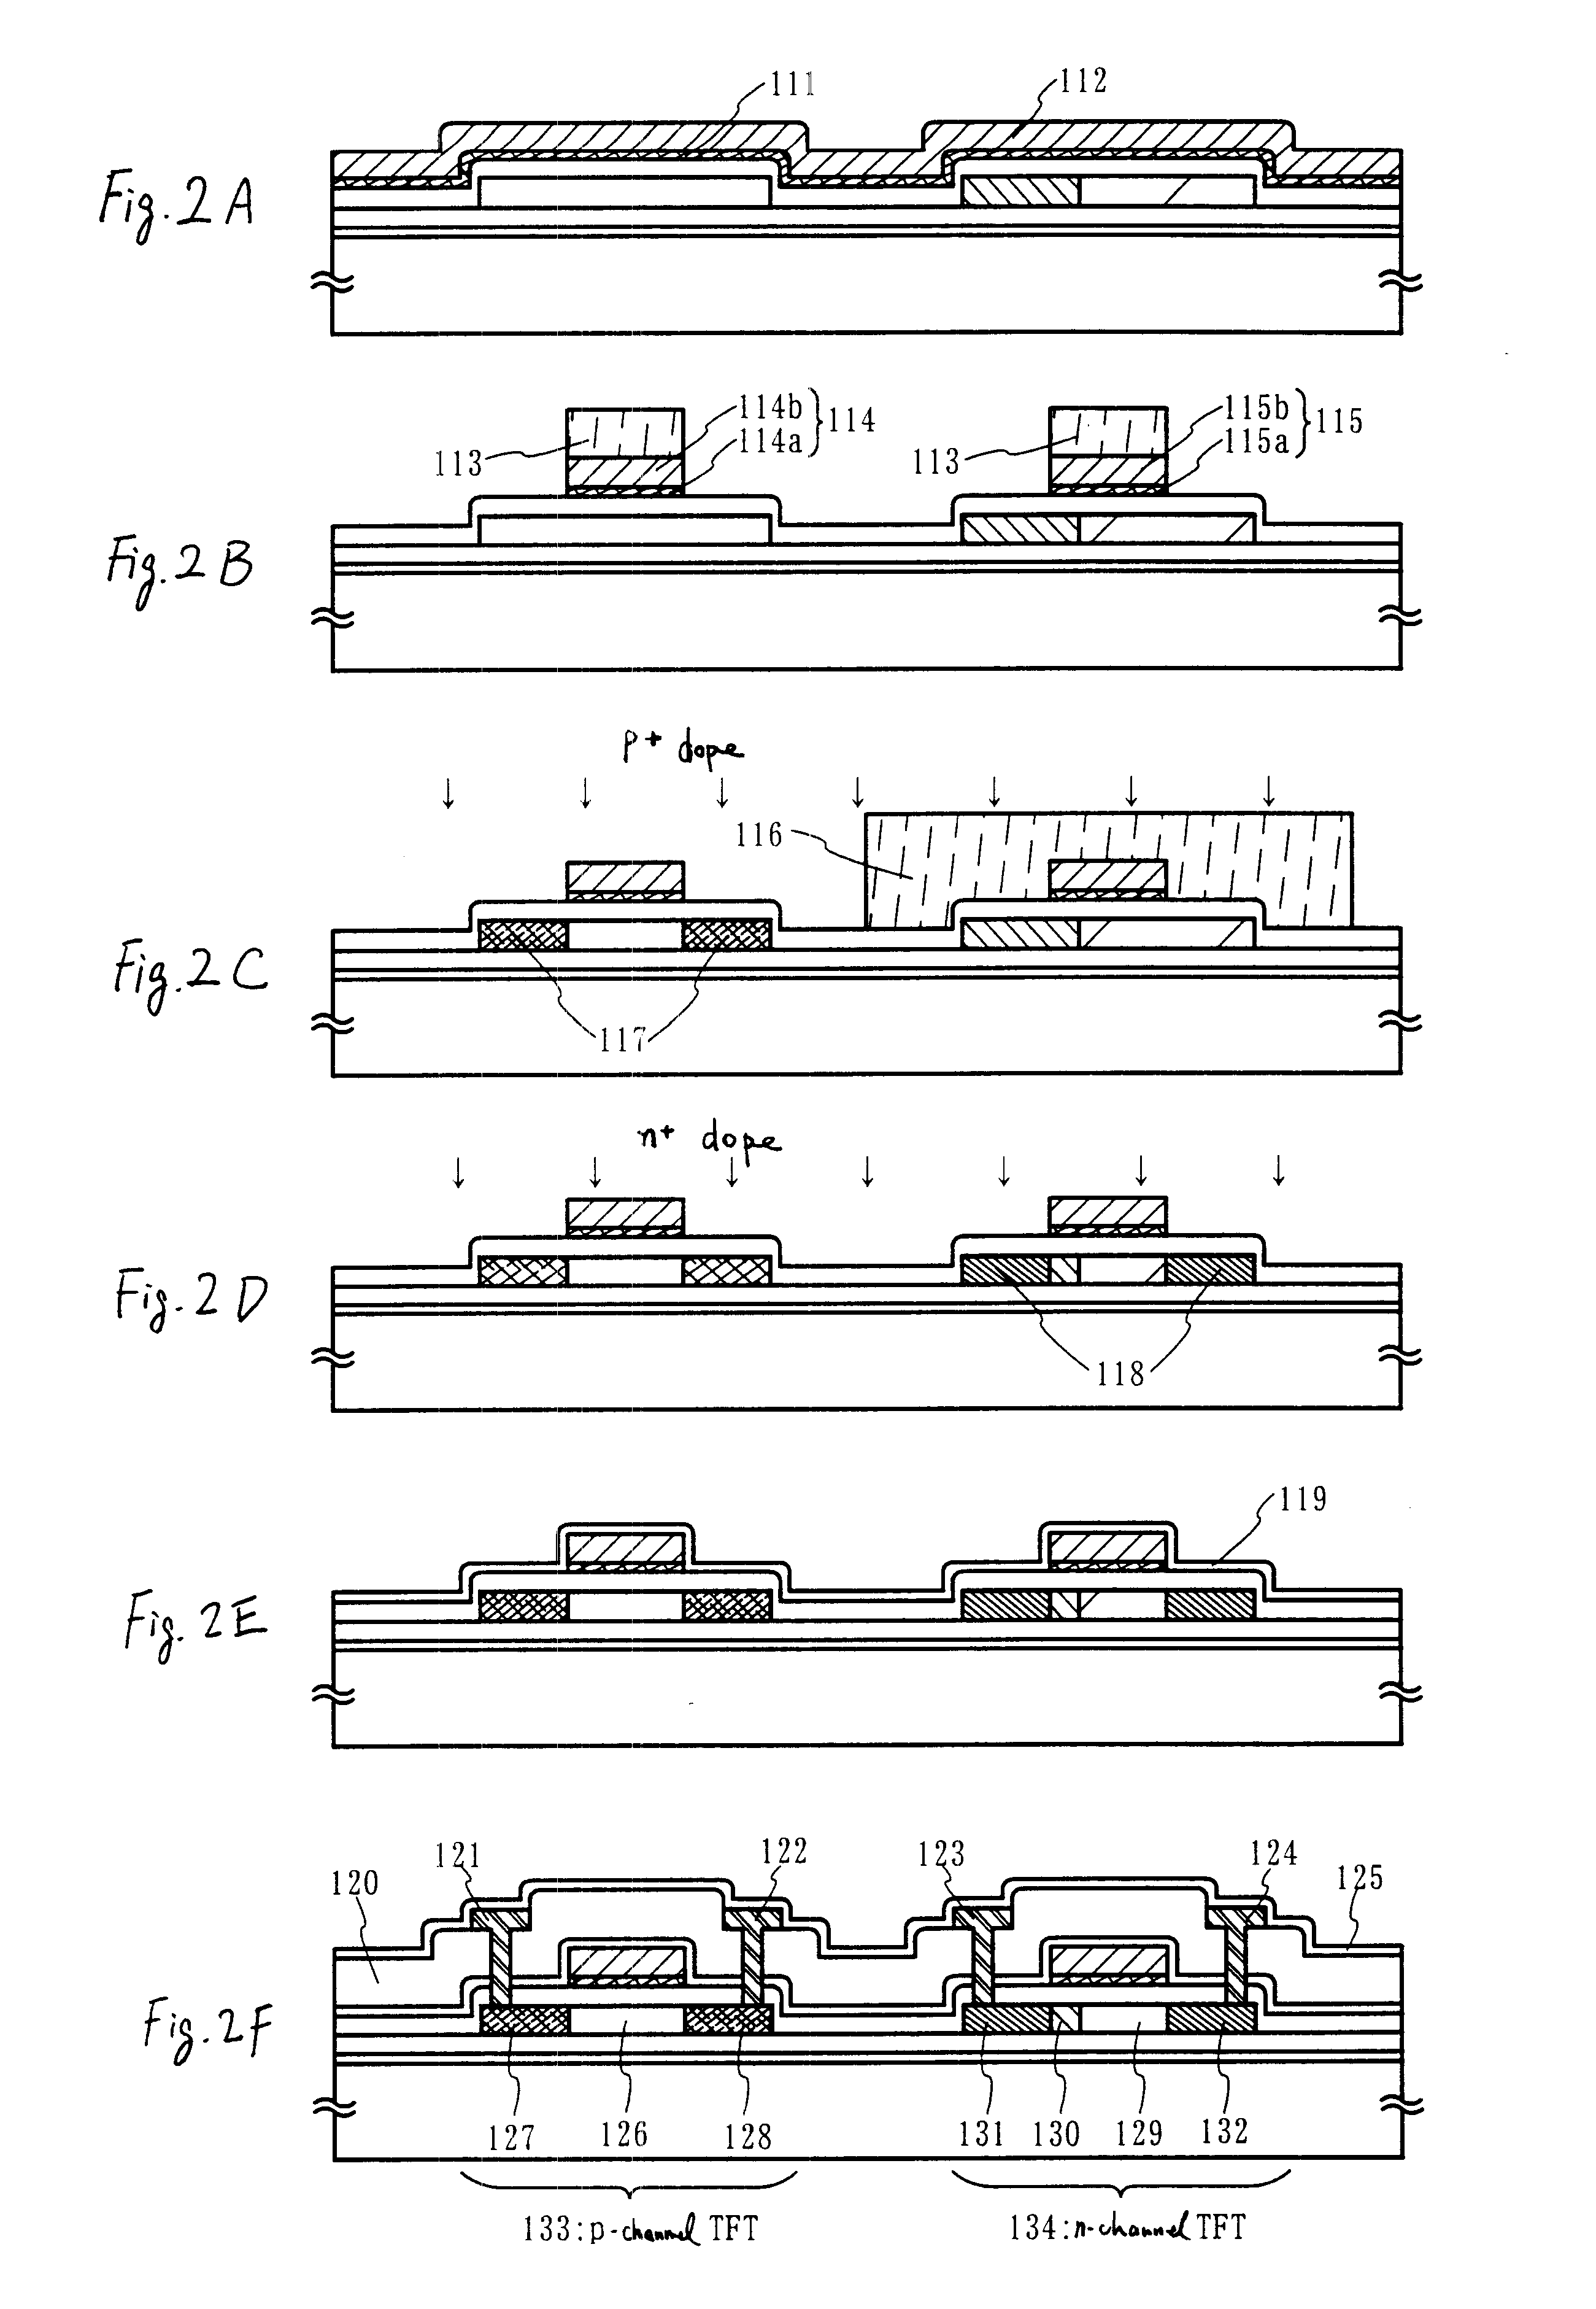 Oxynitride laminate "blocking layer" for thin film semiconductor devices